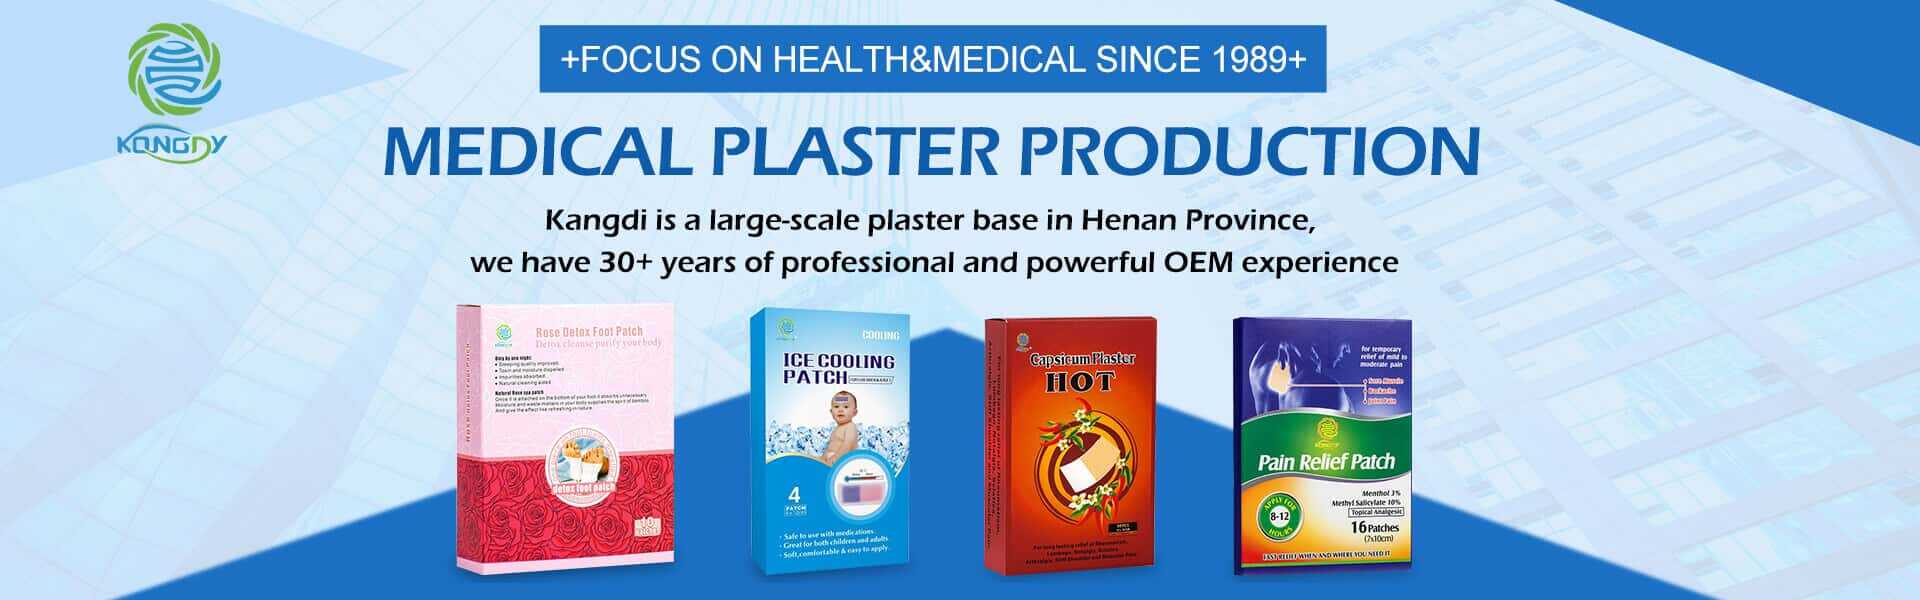 Kongdy|Medical plaster product